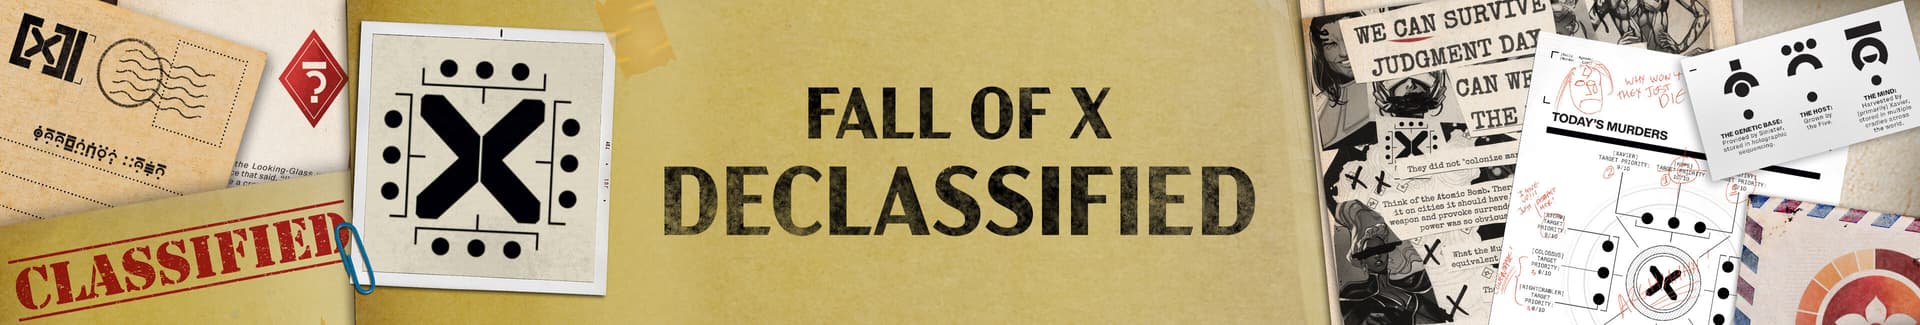 'Fall of X' Declassified banner